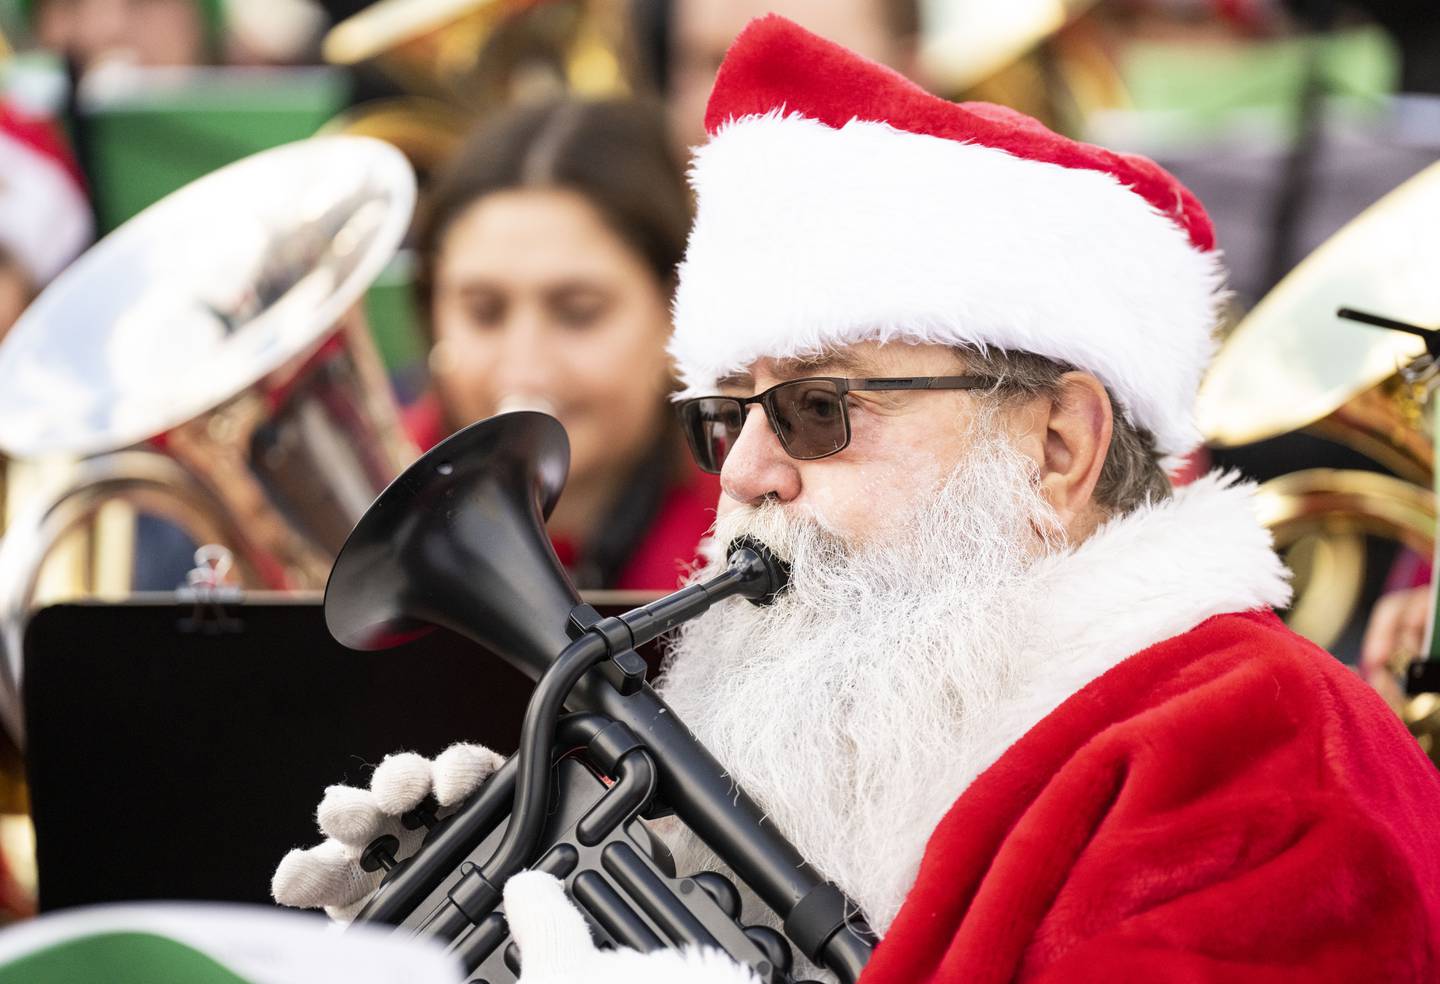 Richard Spittel, of Baltimore, performs with other musicians through a piece of music during the 37th TubaChristmas at the Inner Harbor Amphitheater, in Baltimore, Saturday, December 17, 2022